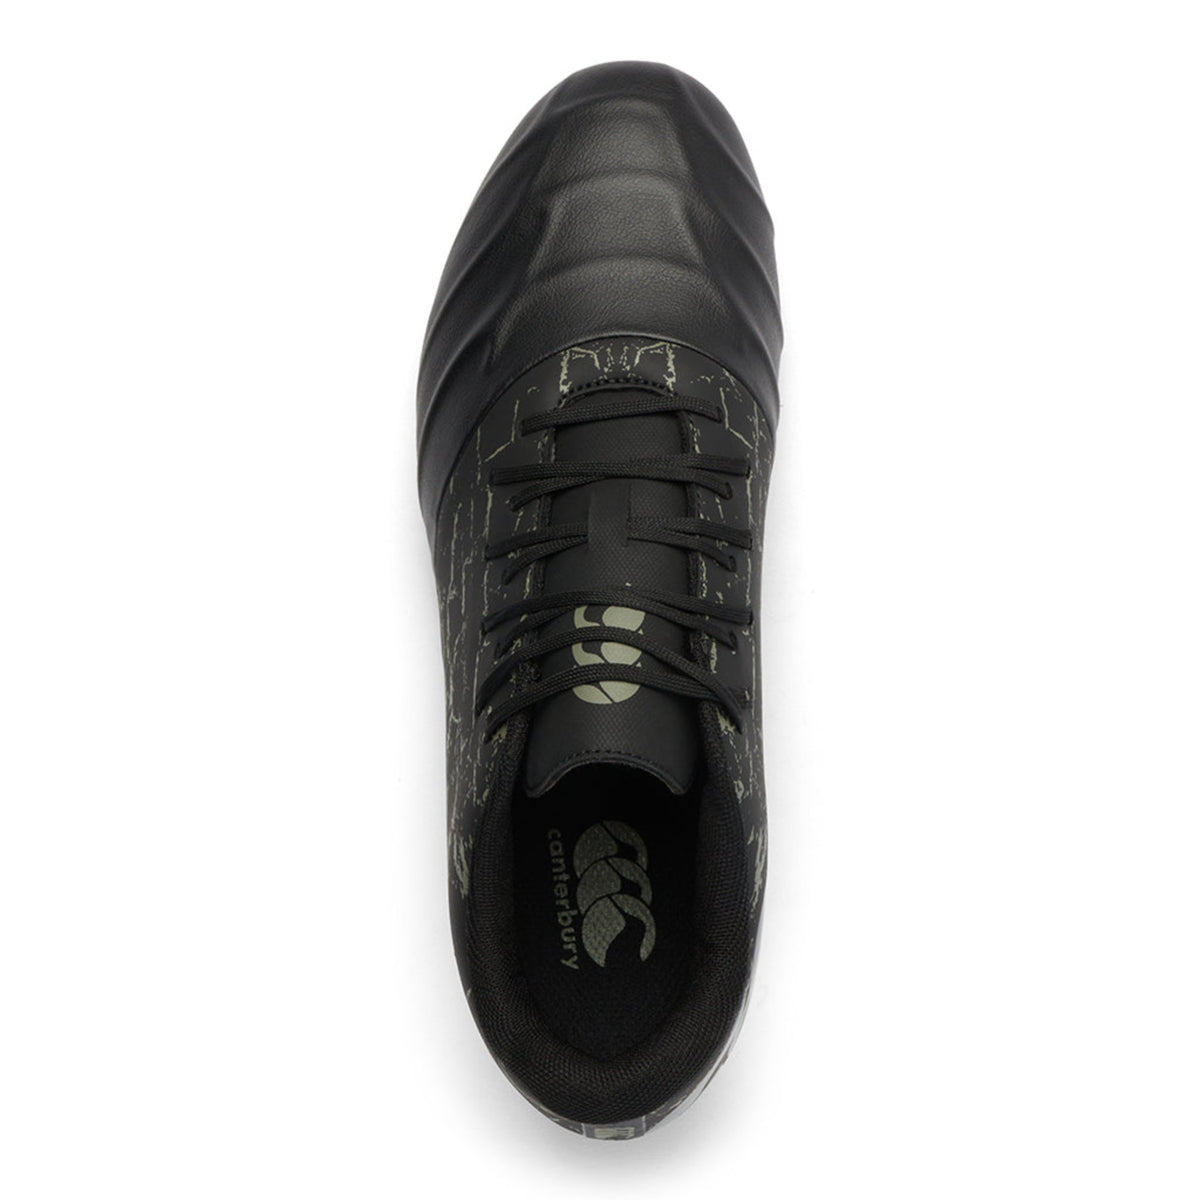 Canterbury Phoenix Genesis Team SG Cleats a High-Performance Quality Rugby Boot Black/Grey available in Unisex Sizing 6-16